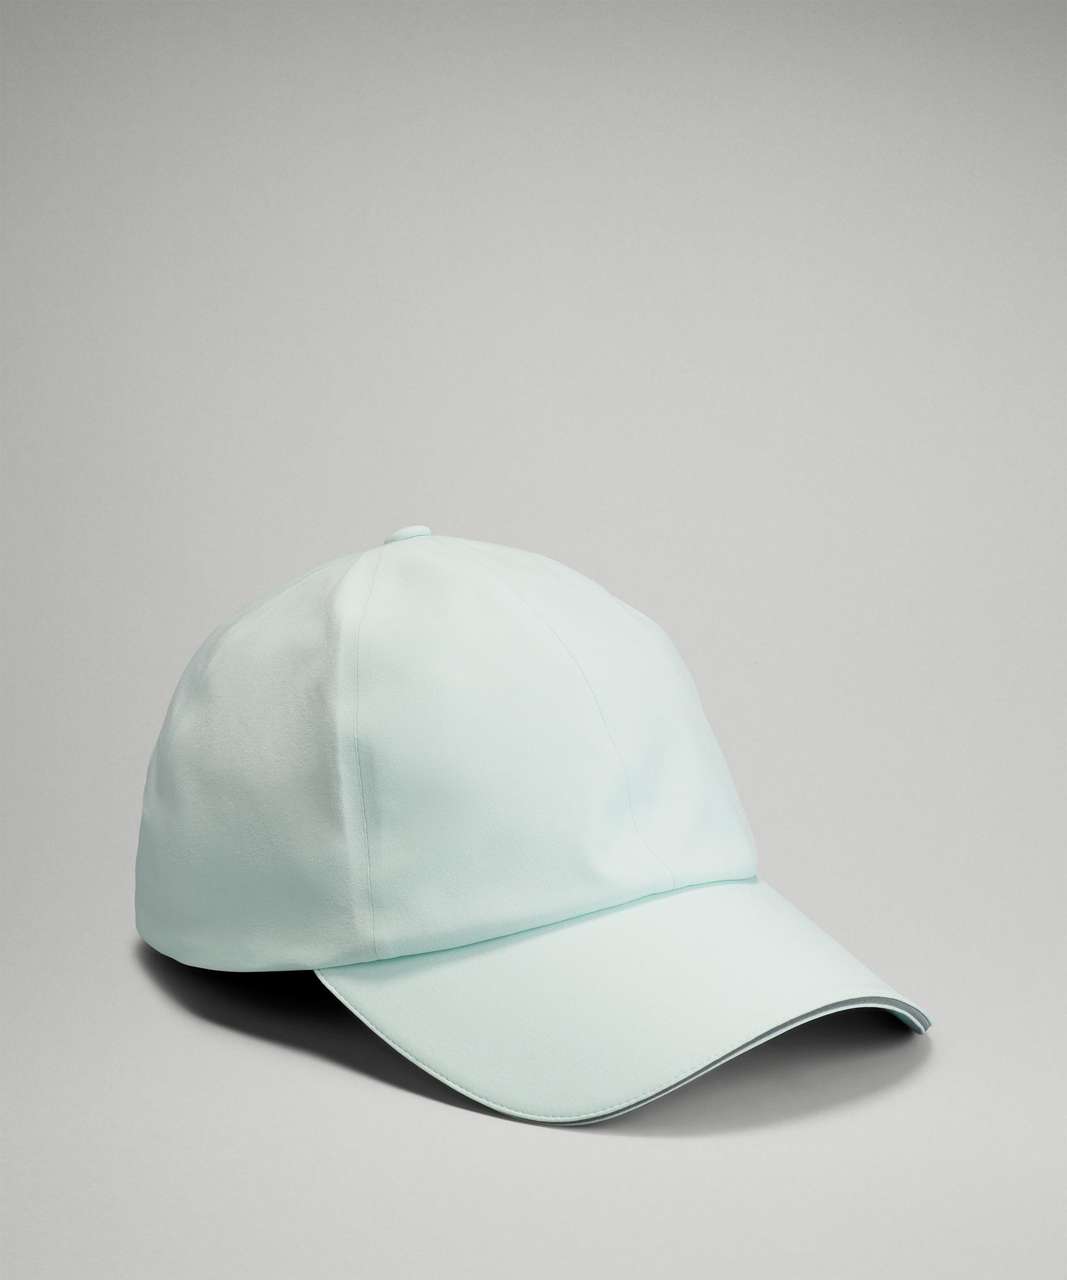 Lululemon Womens Fast and Free Run Hat - Delicate Mint